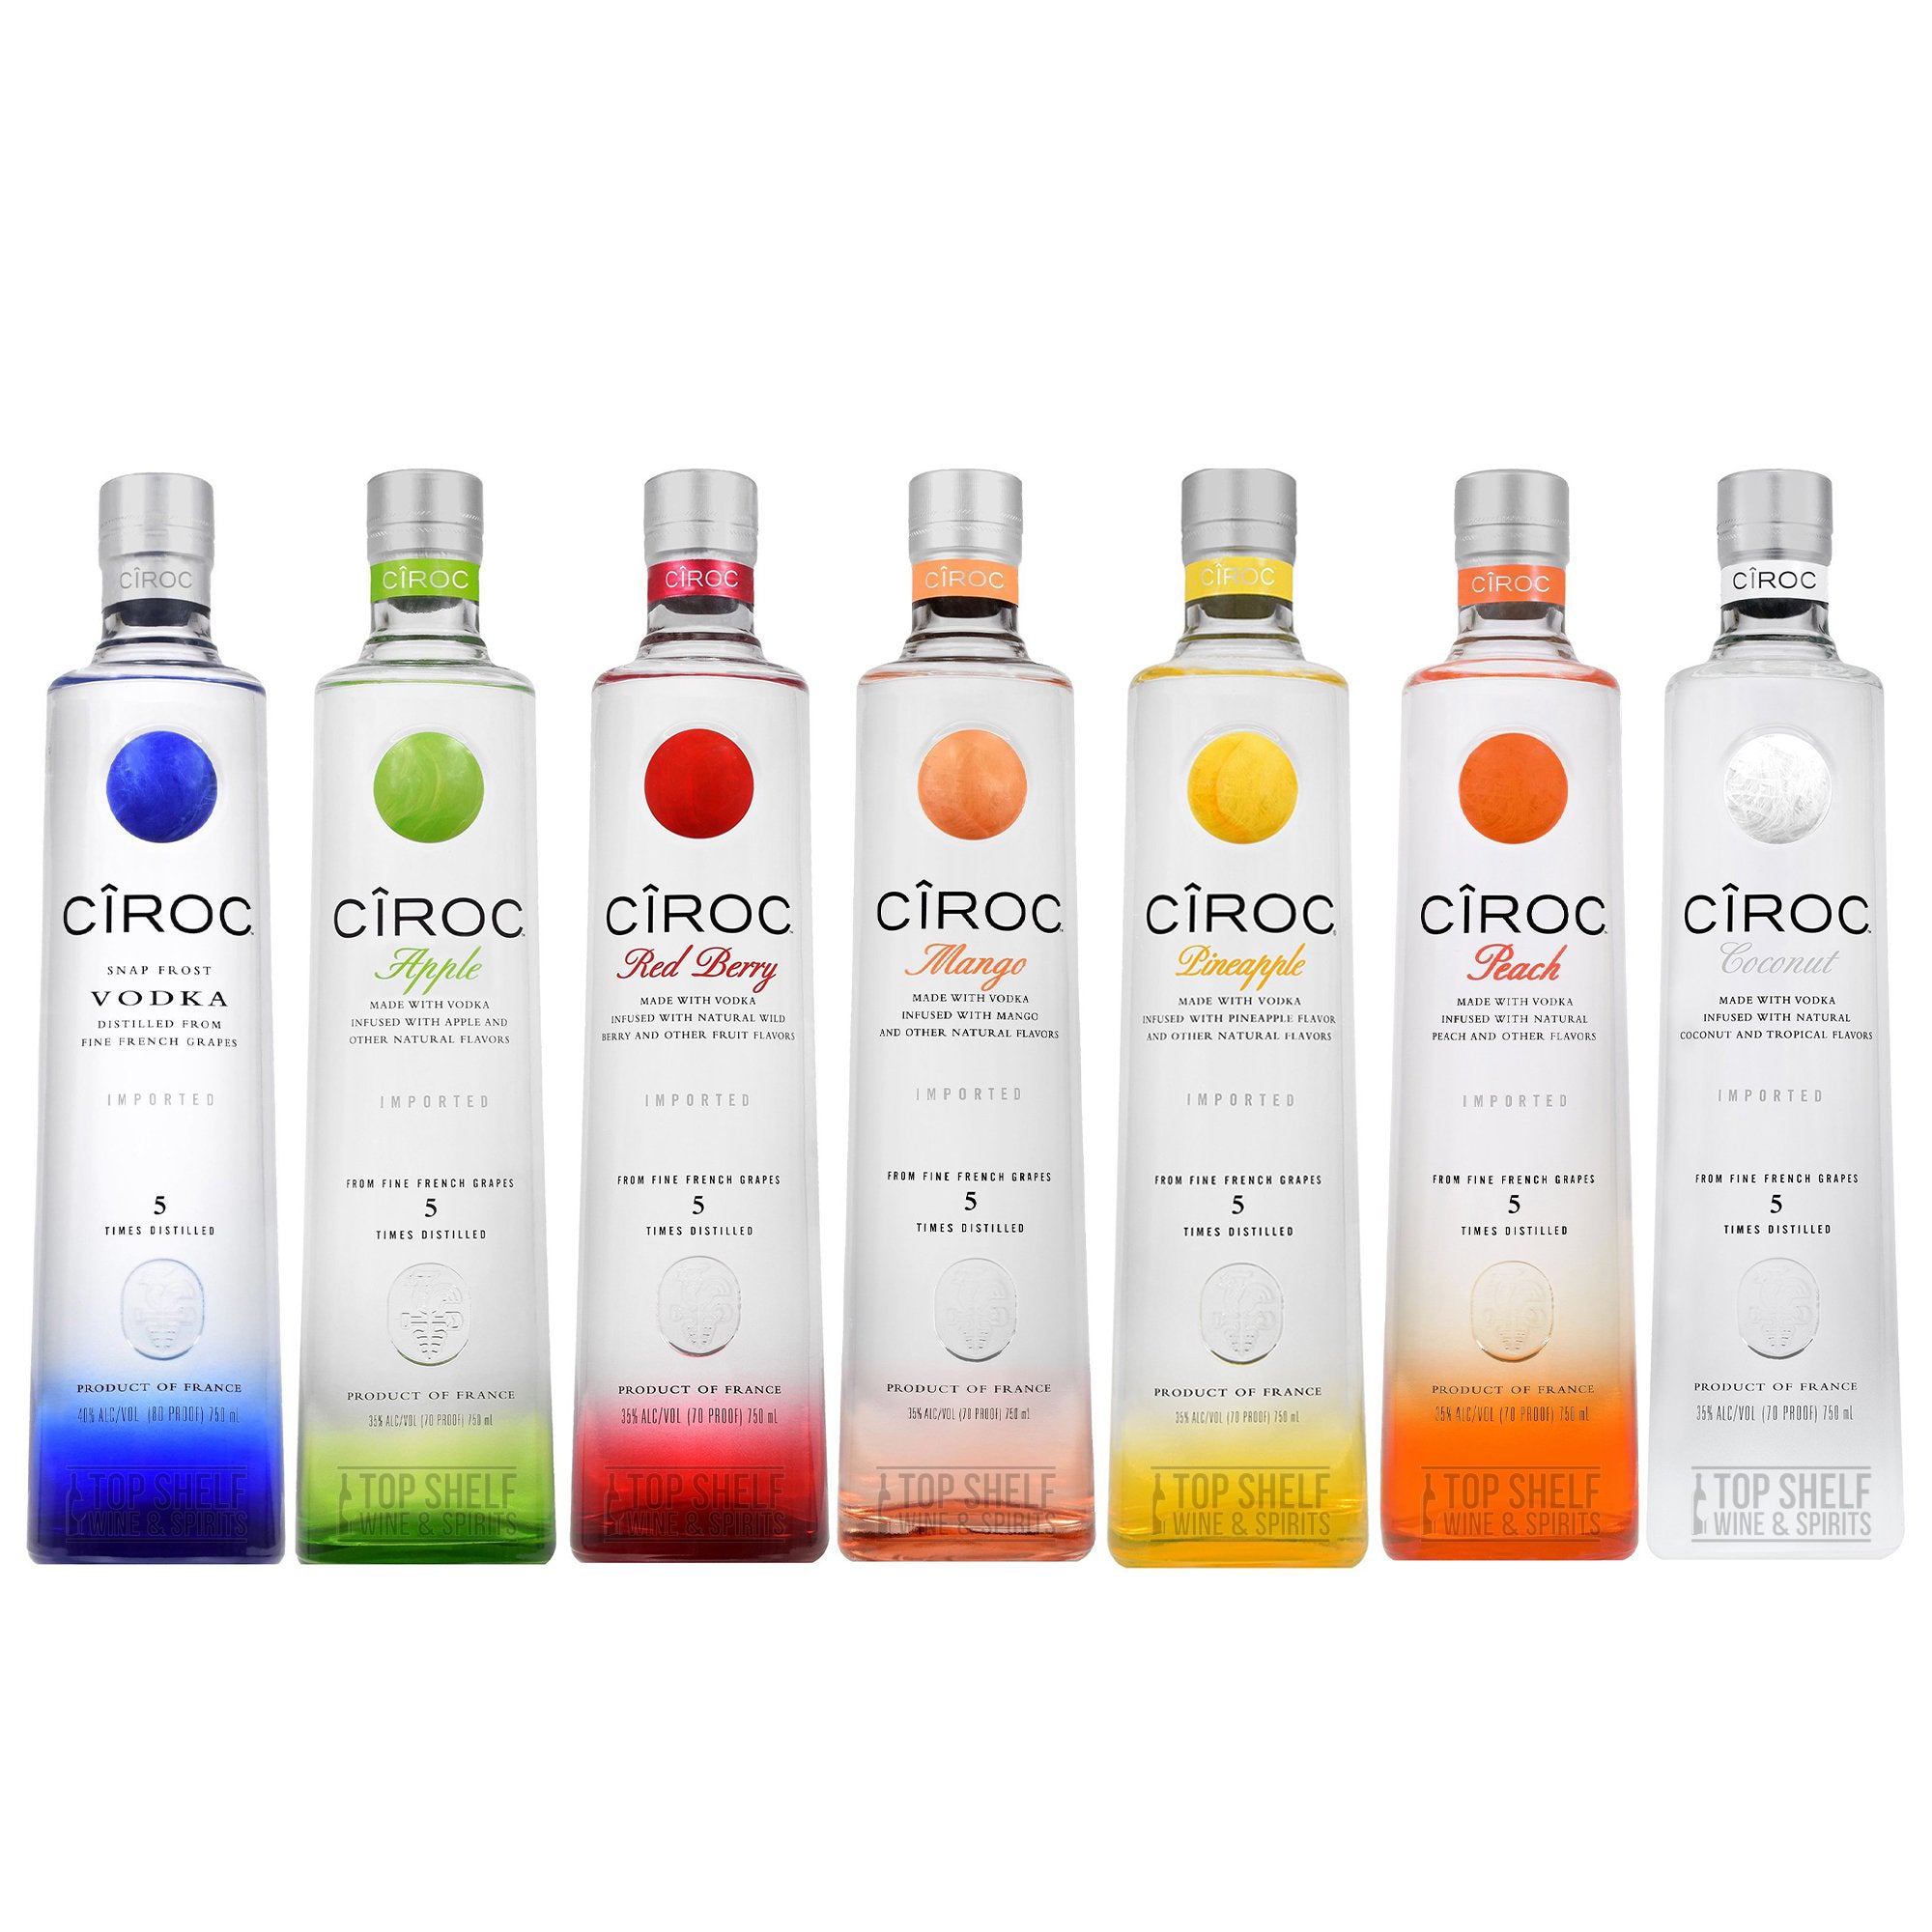 Buy Ciroc Passion Limited Edition Vodka online at  and  have it shipped to your door nationwide.